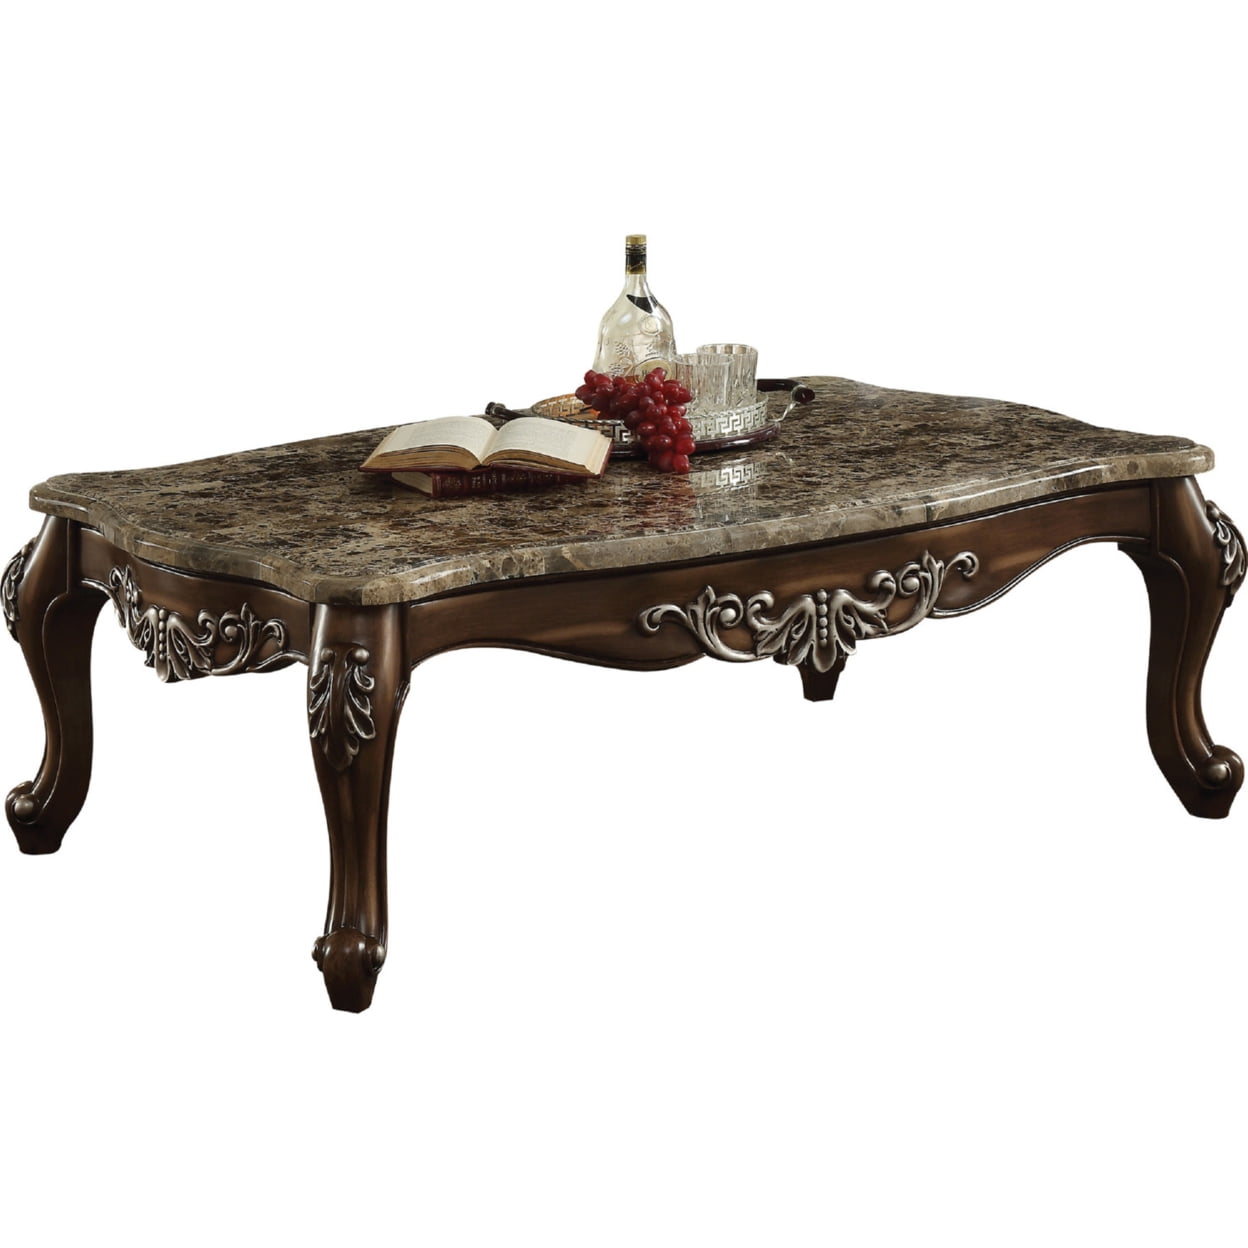 Picture of ACME 82145 Rectangular Latisha Coffee Table - Marble & Antique Oak - 20 x 57 x 35 in.